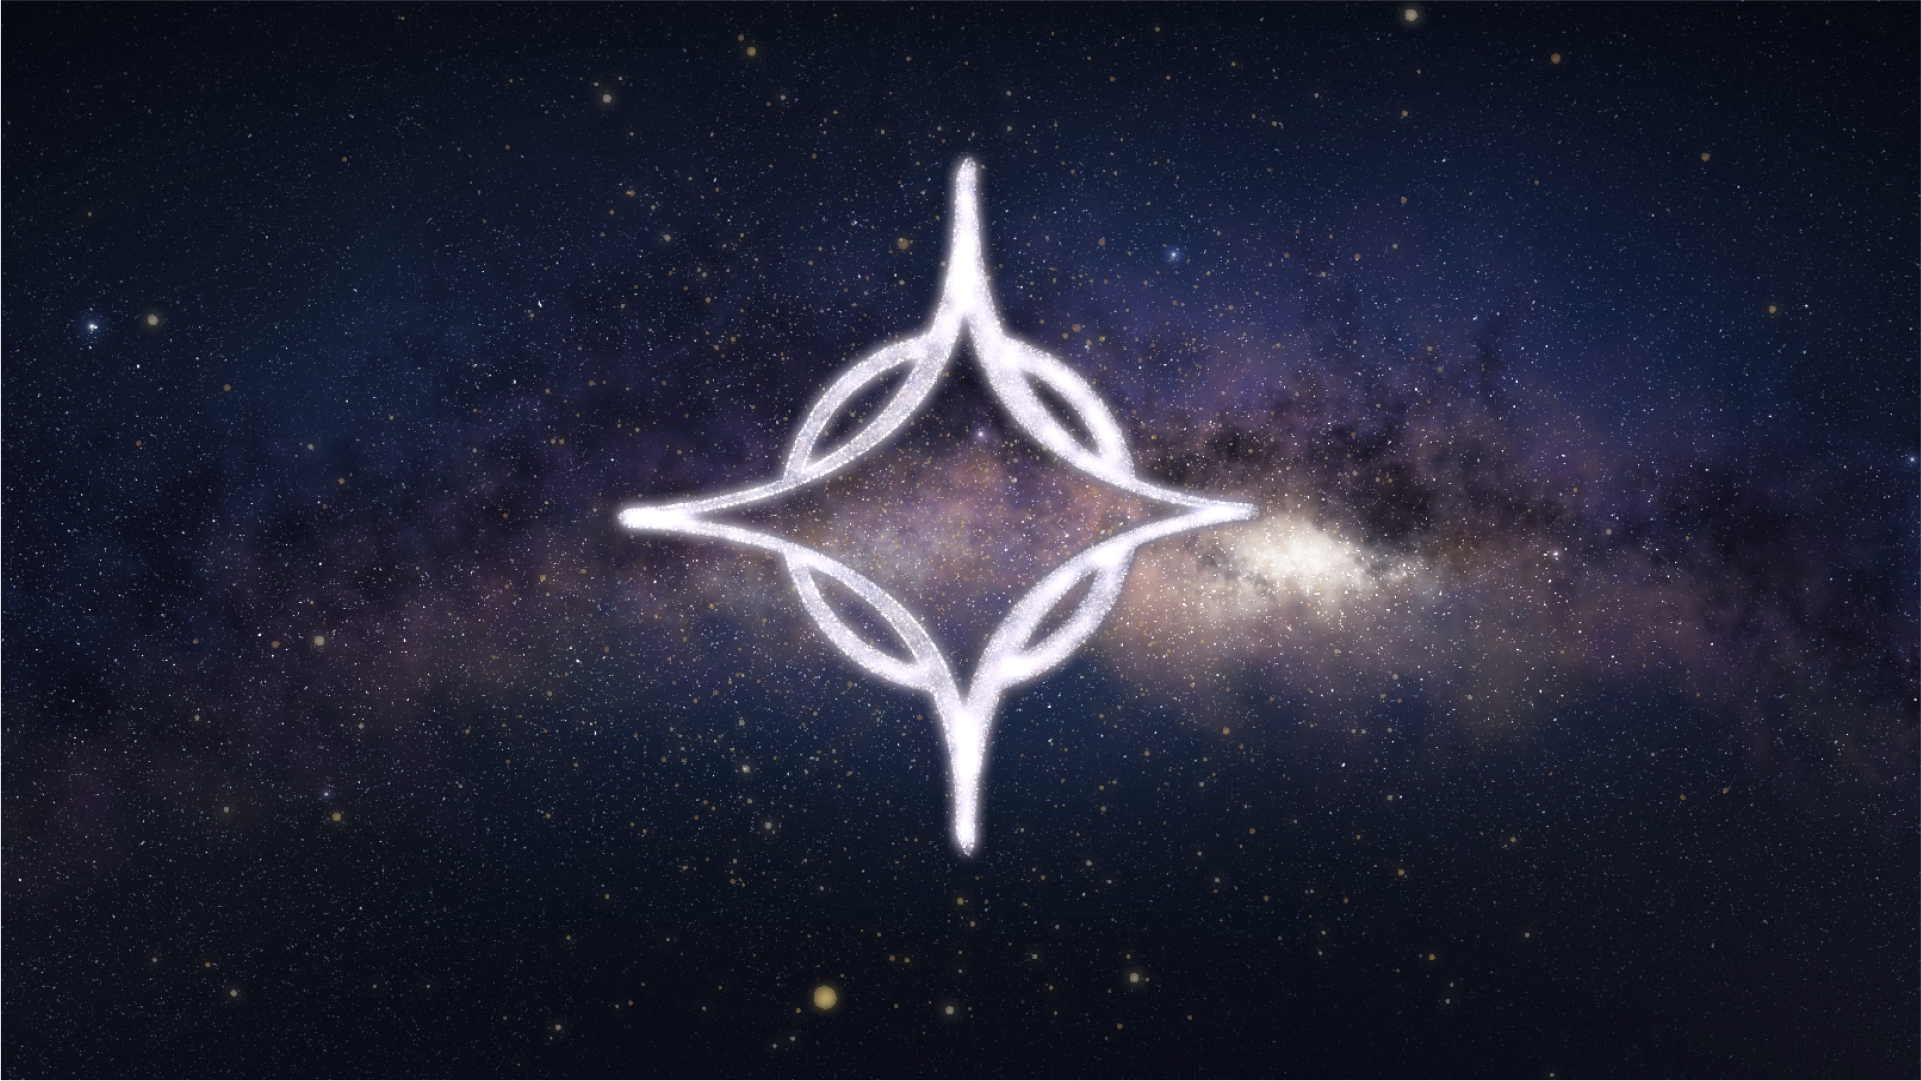 A white particle effect showing the Sounds True logo on an ethereal background